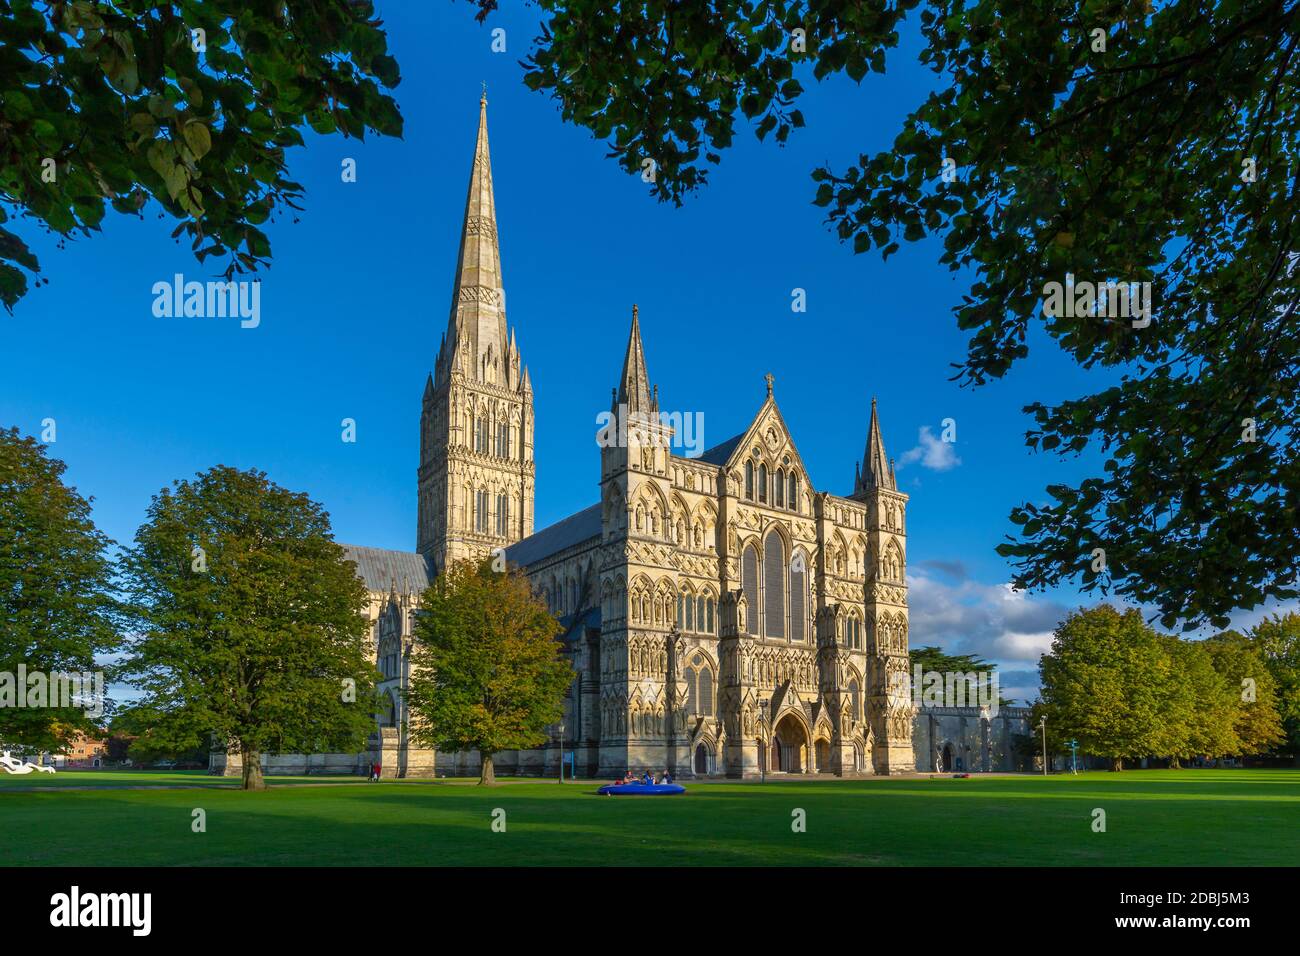 View of Salisbury Cathedral framed by trees, Salisbury, Wiltshire, England, United Kingdom, Europe Stock Photo